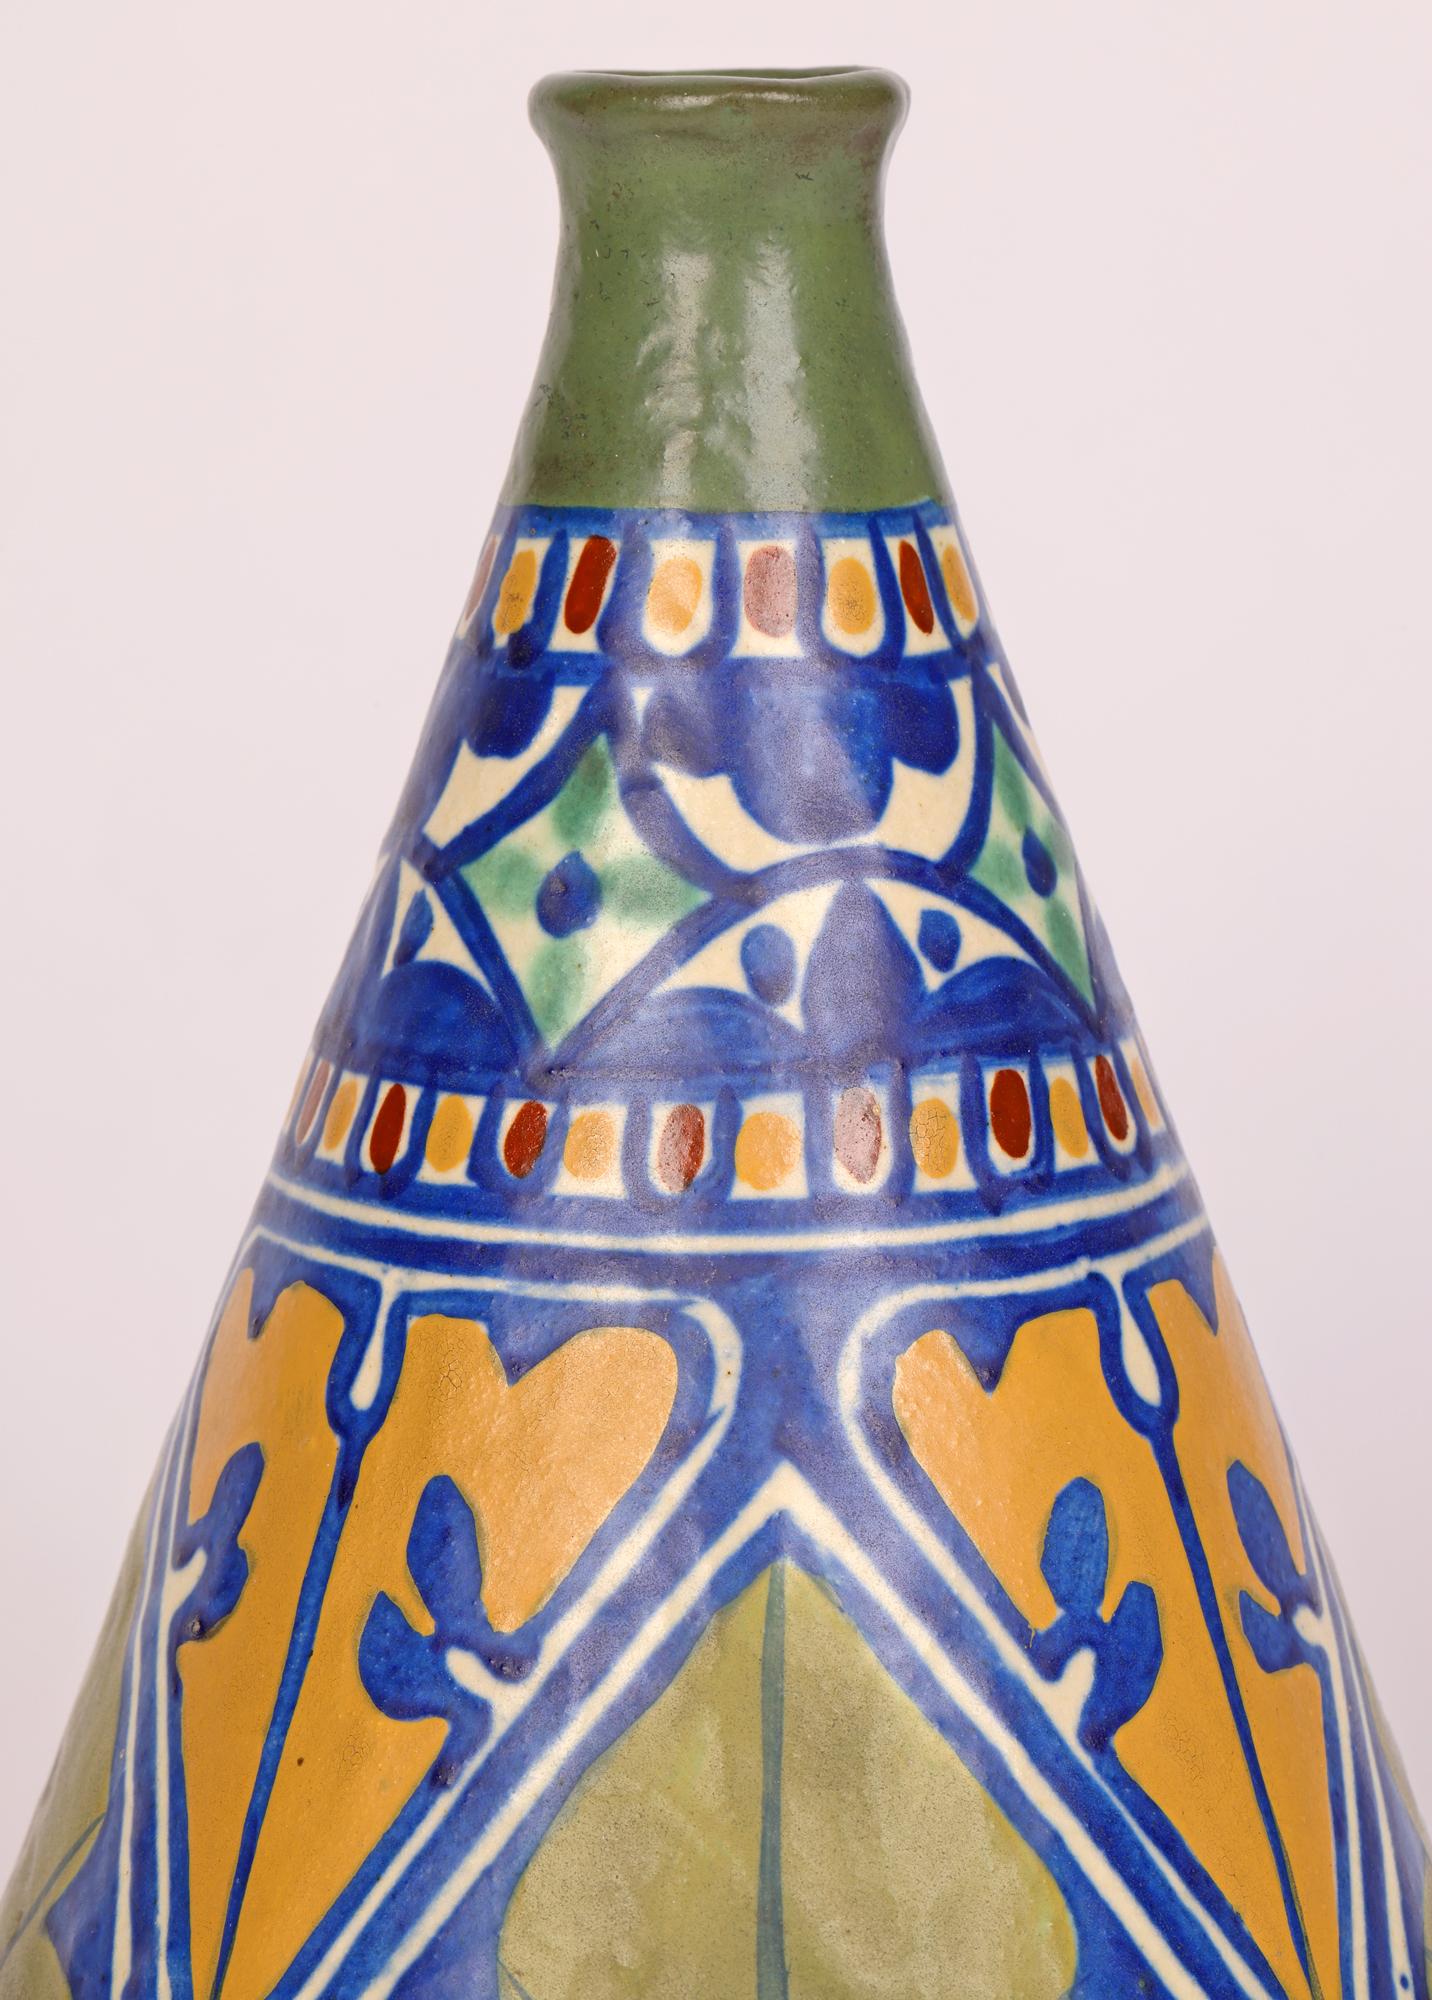 A very stylish early Art Deco art pottery vase decorated with stylized patterning by James Plant of Hanley and dating from around 1915. The pottery produced a range of vases of varying shape using this pattern which we believe was probably inspired